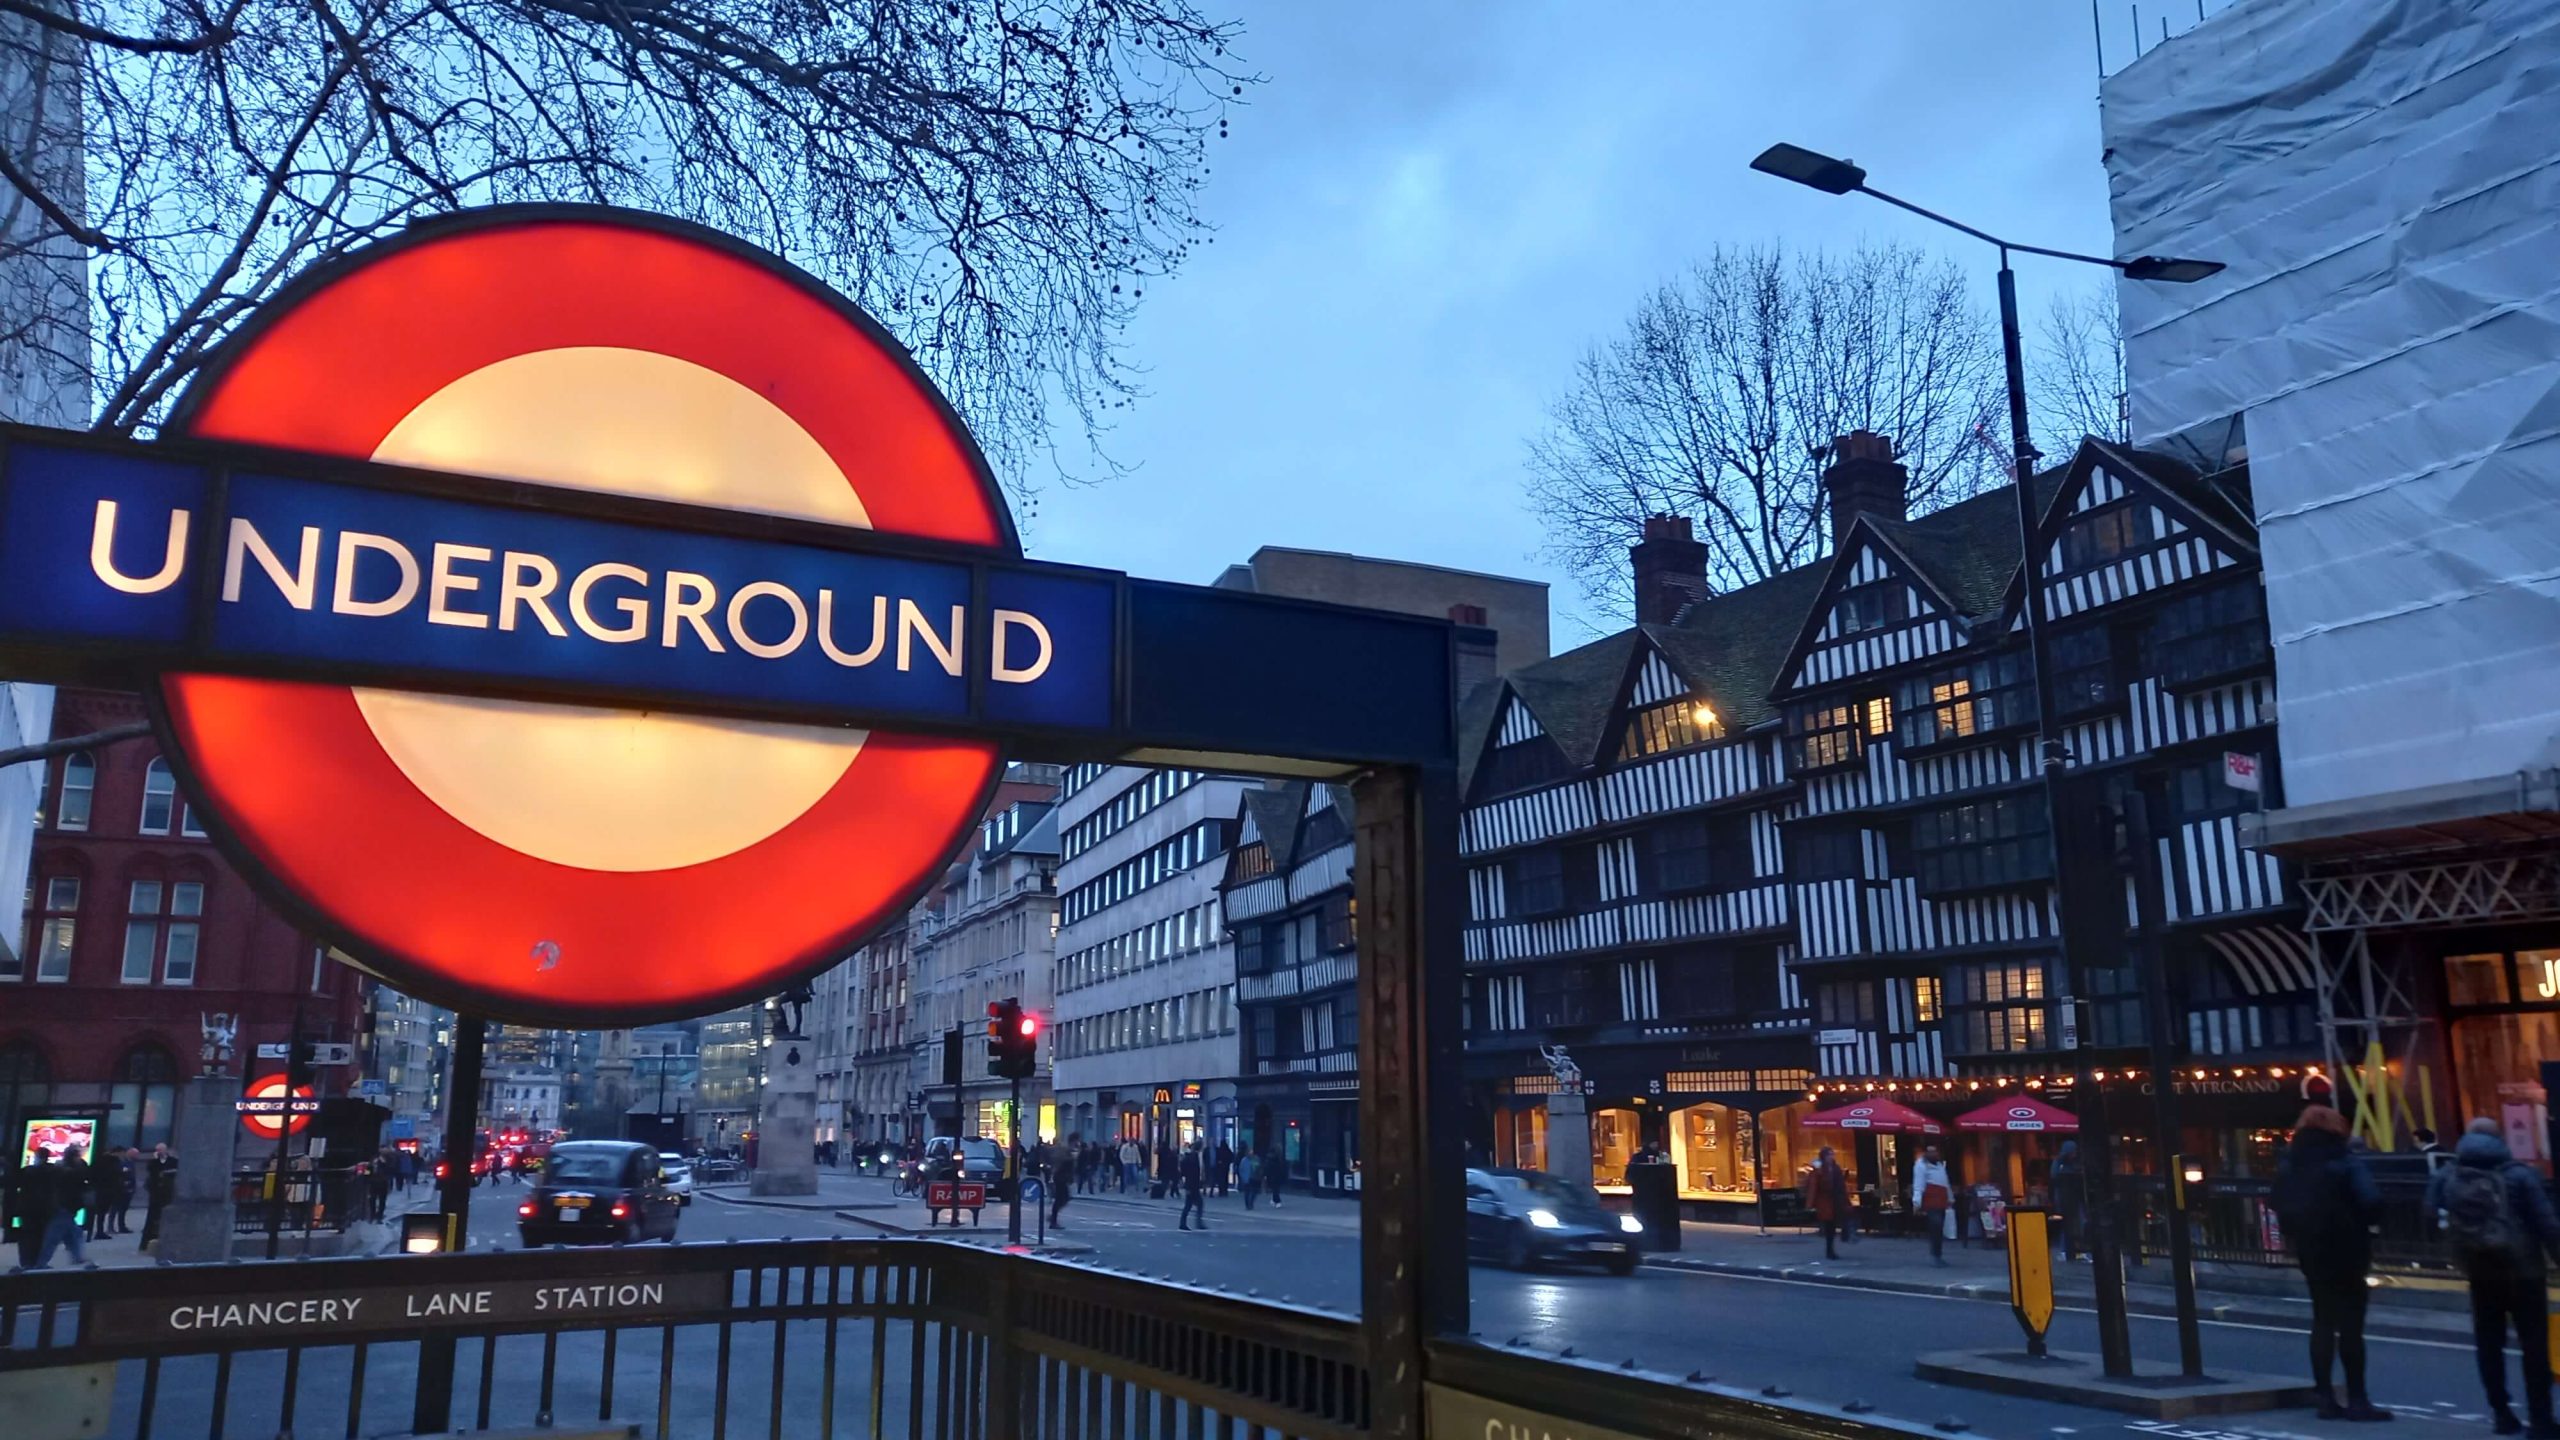 Photo is of London, tube